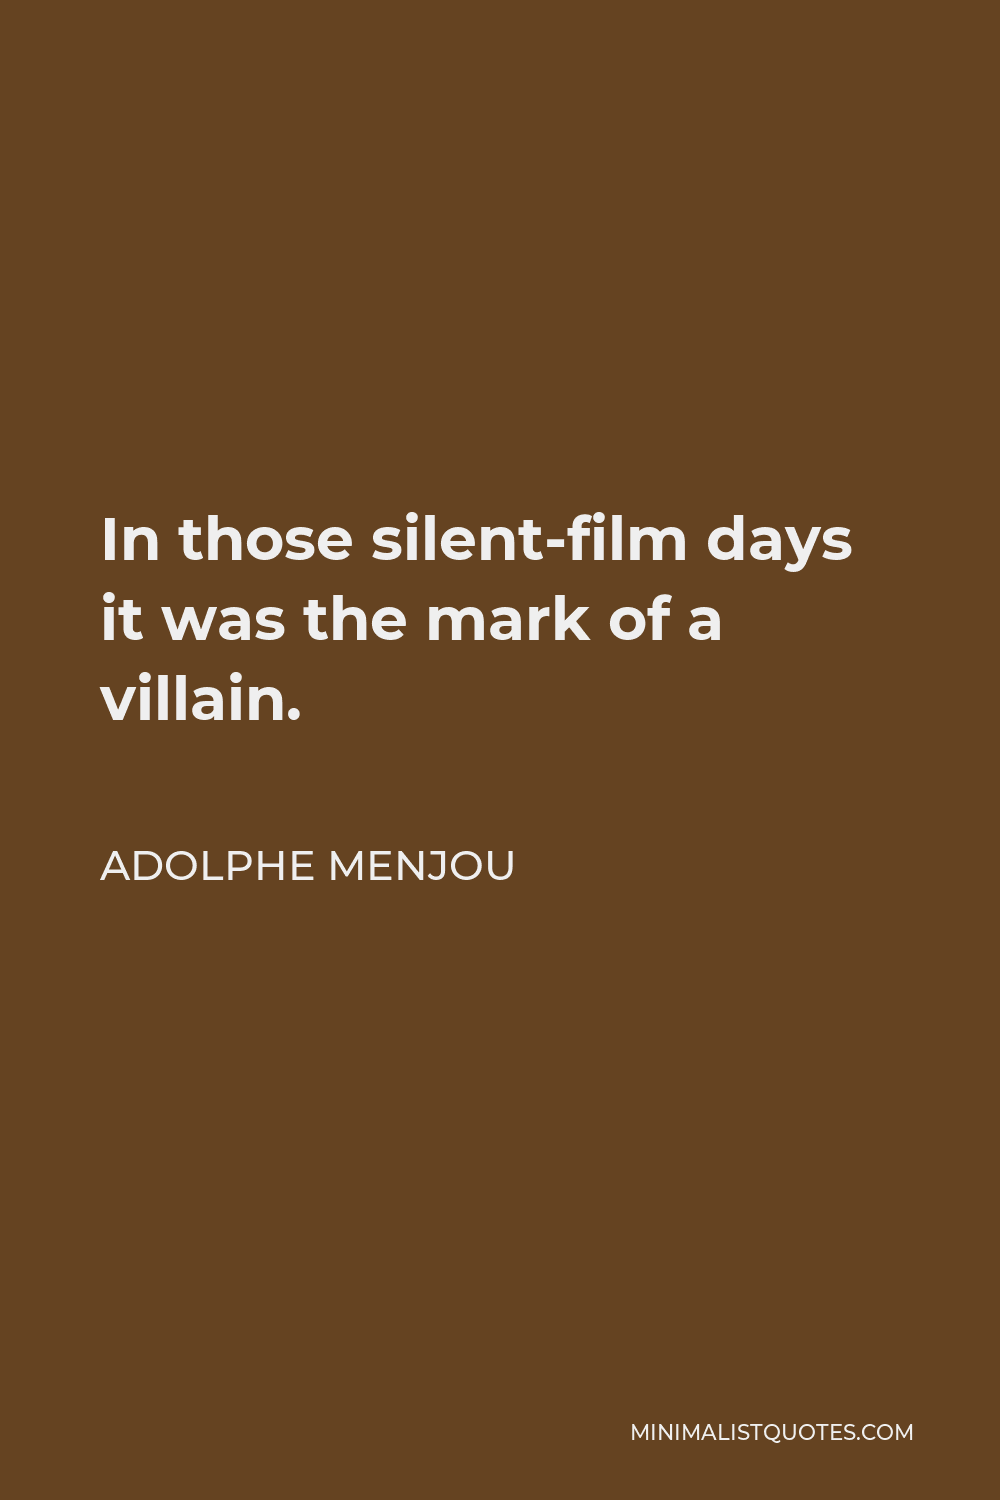 Adolphe Menjou Quote - In those silent-film days it was the mark of a villain.